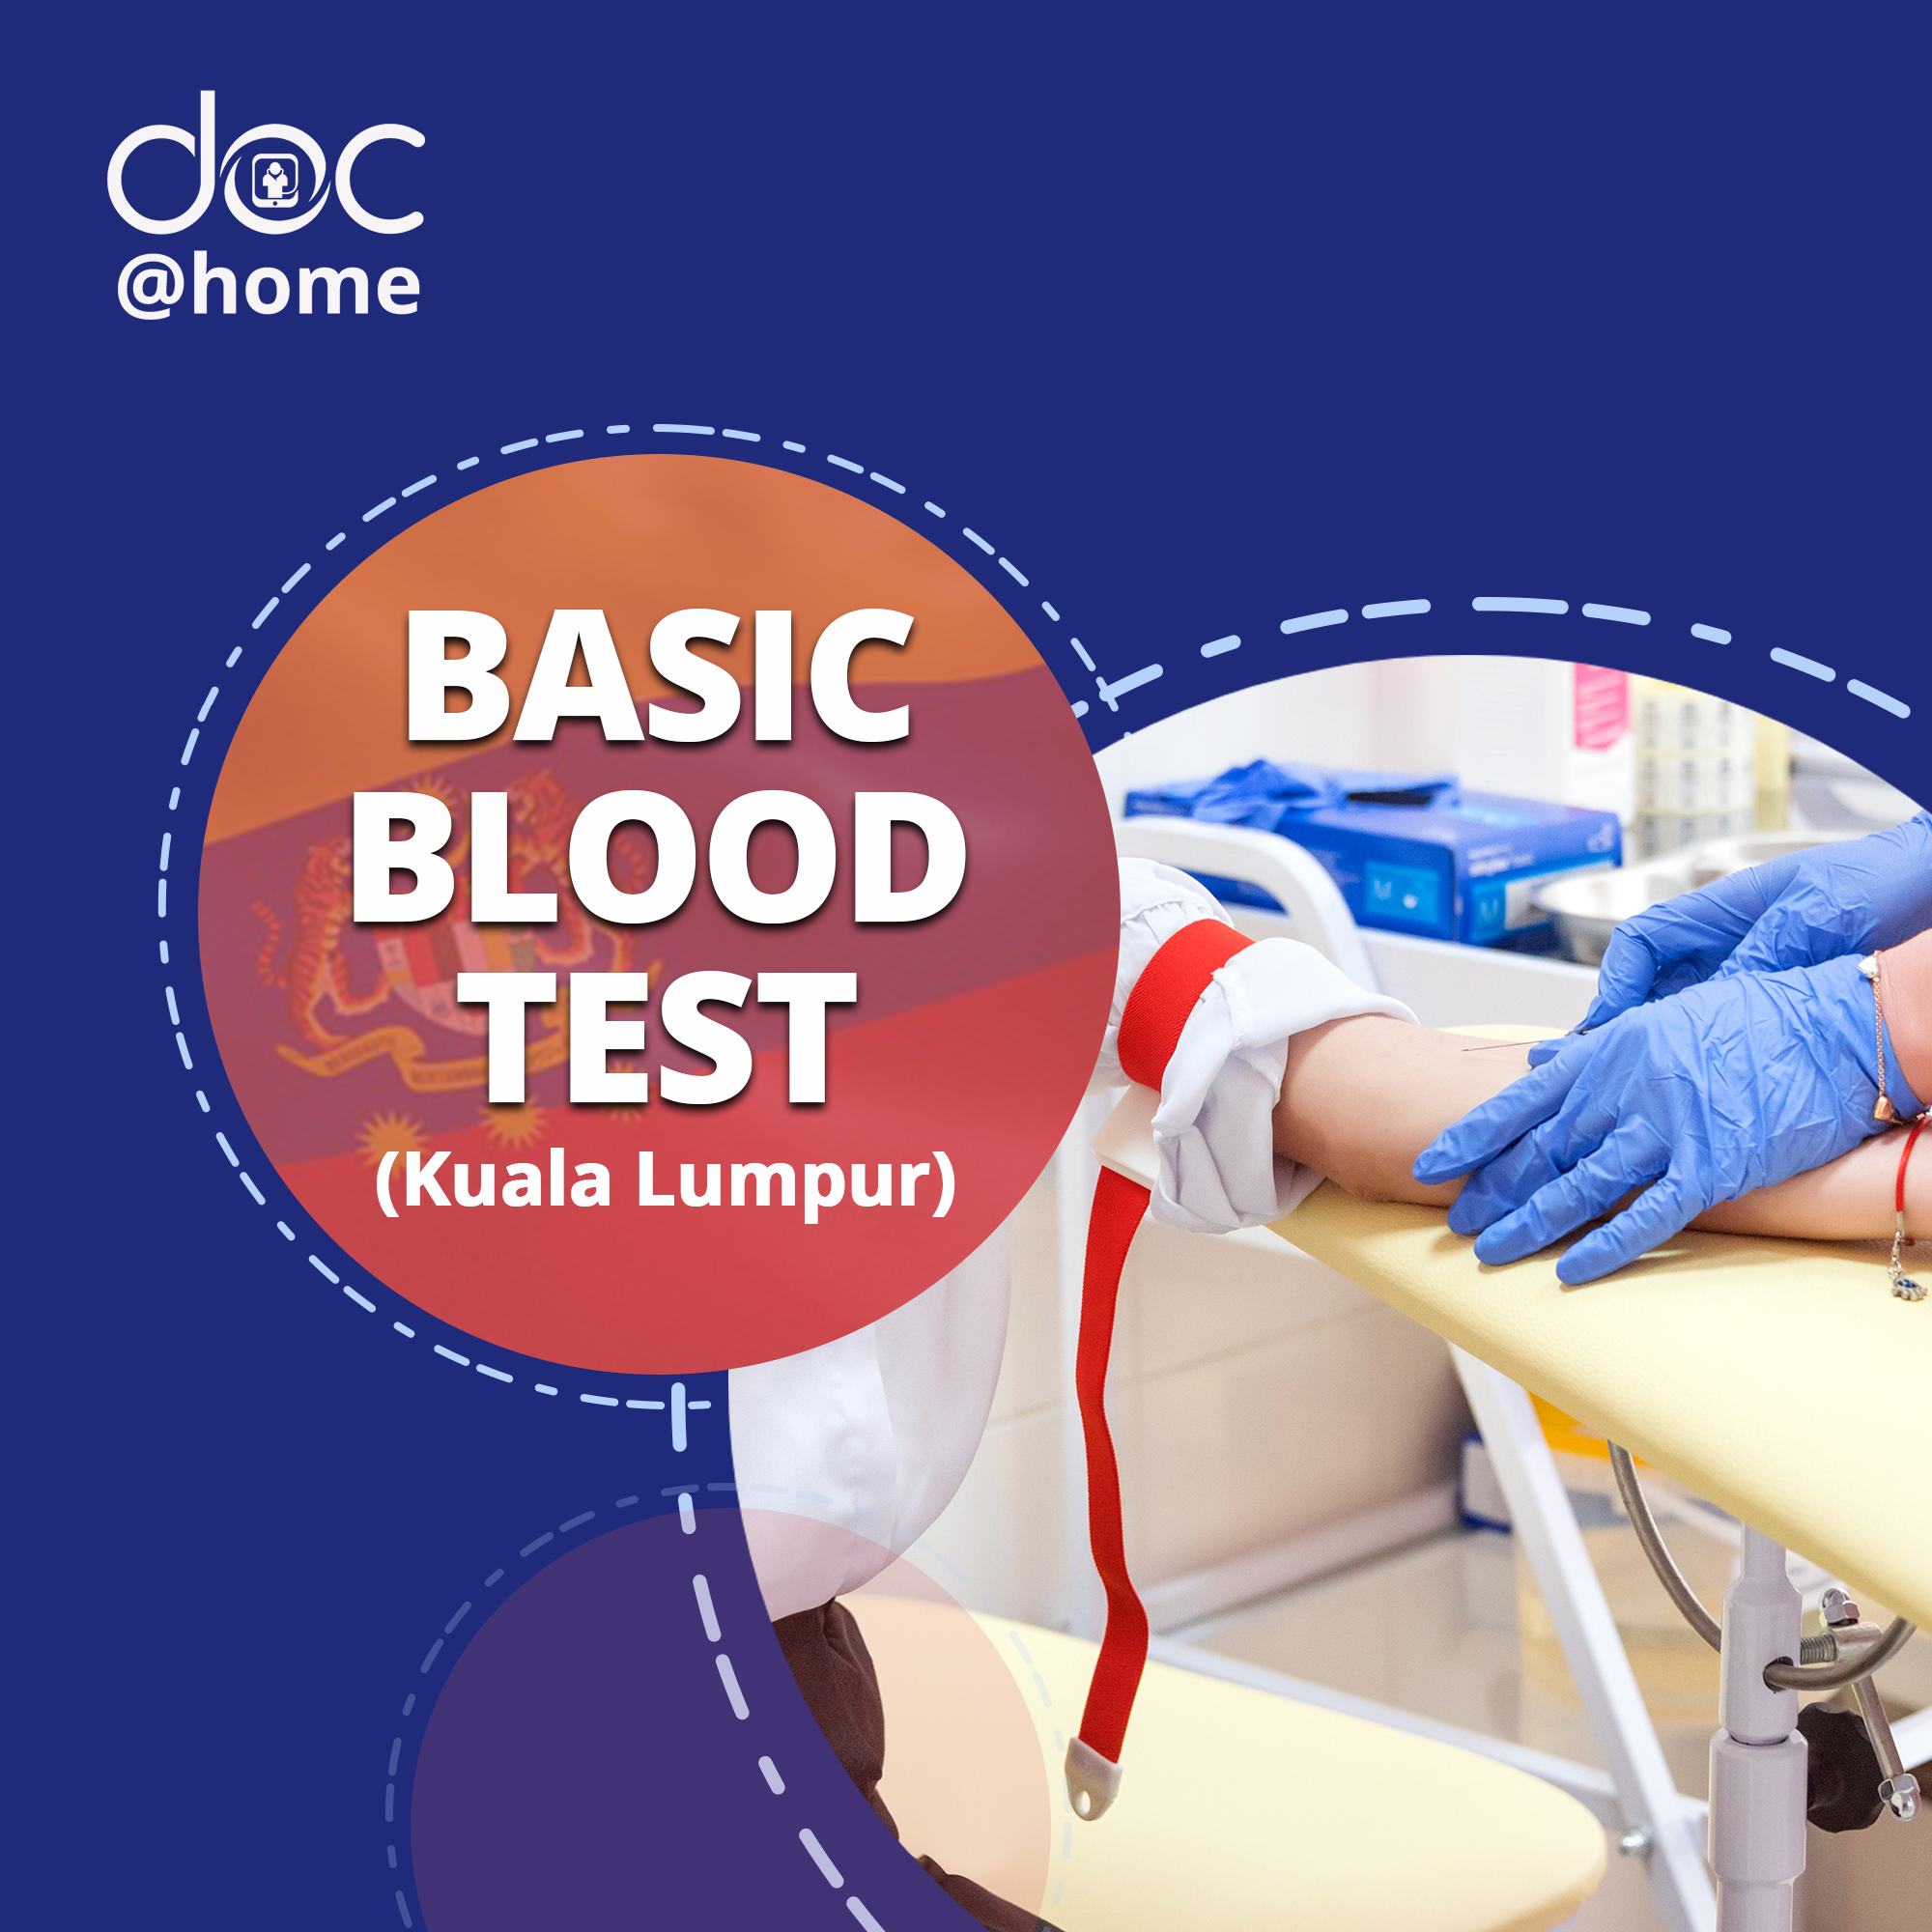 Basic Blood Test Package At Home (Kuala Lumpur) - Basic Blood Test x 1 (pax) - DoctorOnCall Online Pharmacy